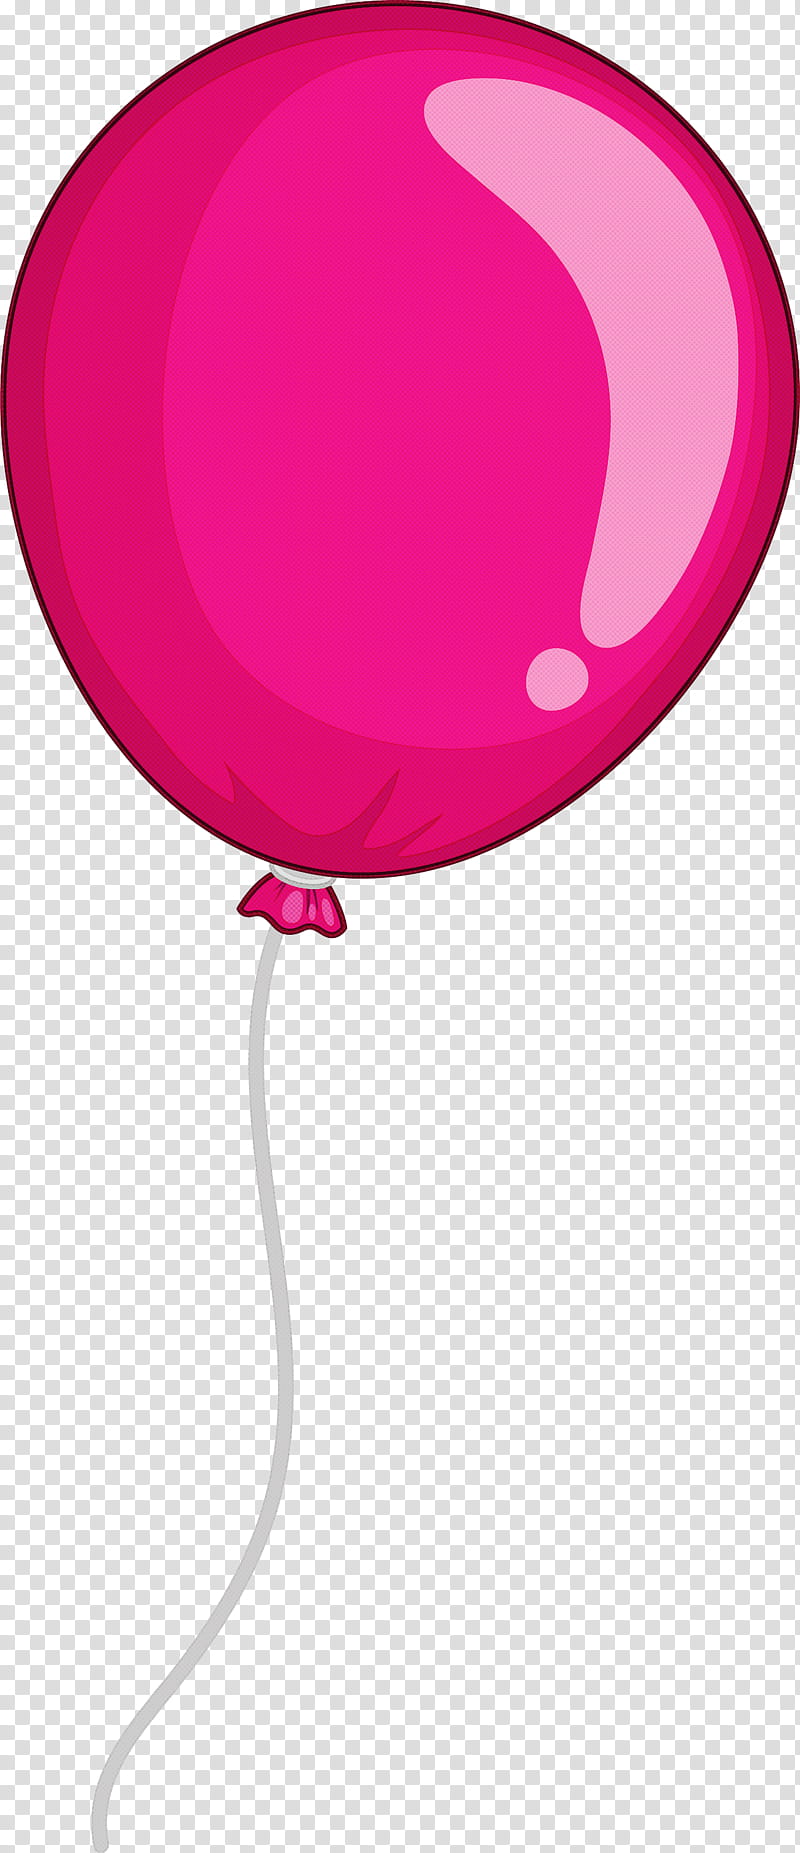 Balloon, Birthday
, Red, Black, Hot Air Balloon, Computer, White, Pink transparent background PNG clipart